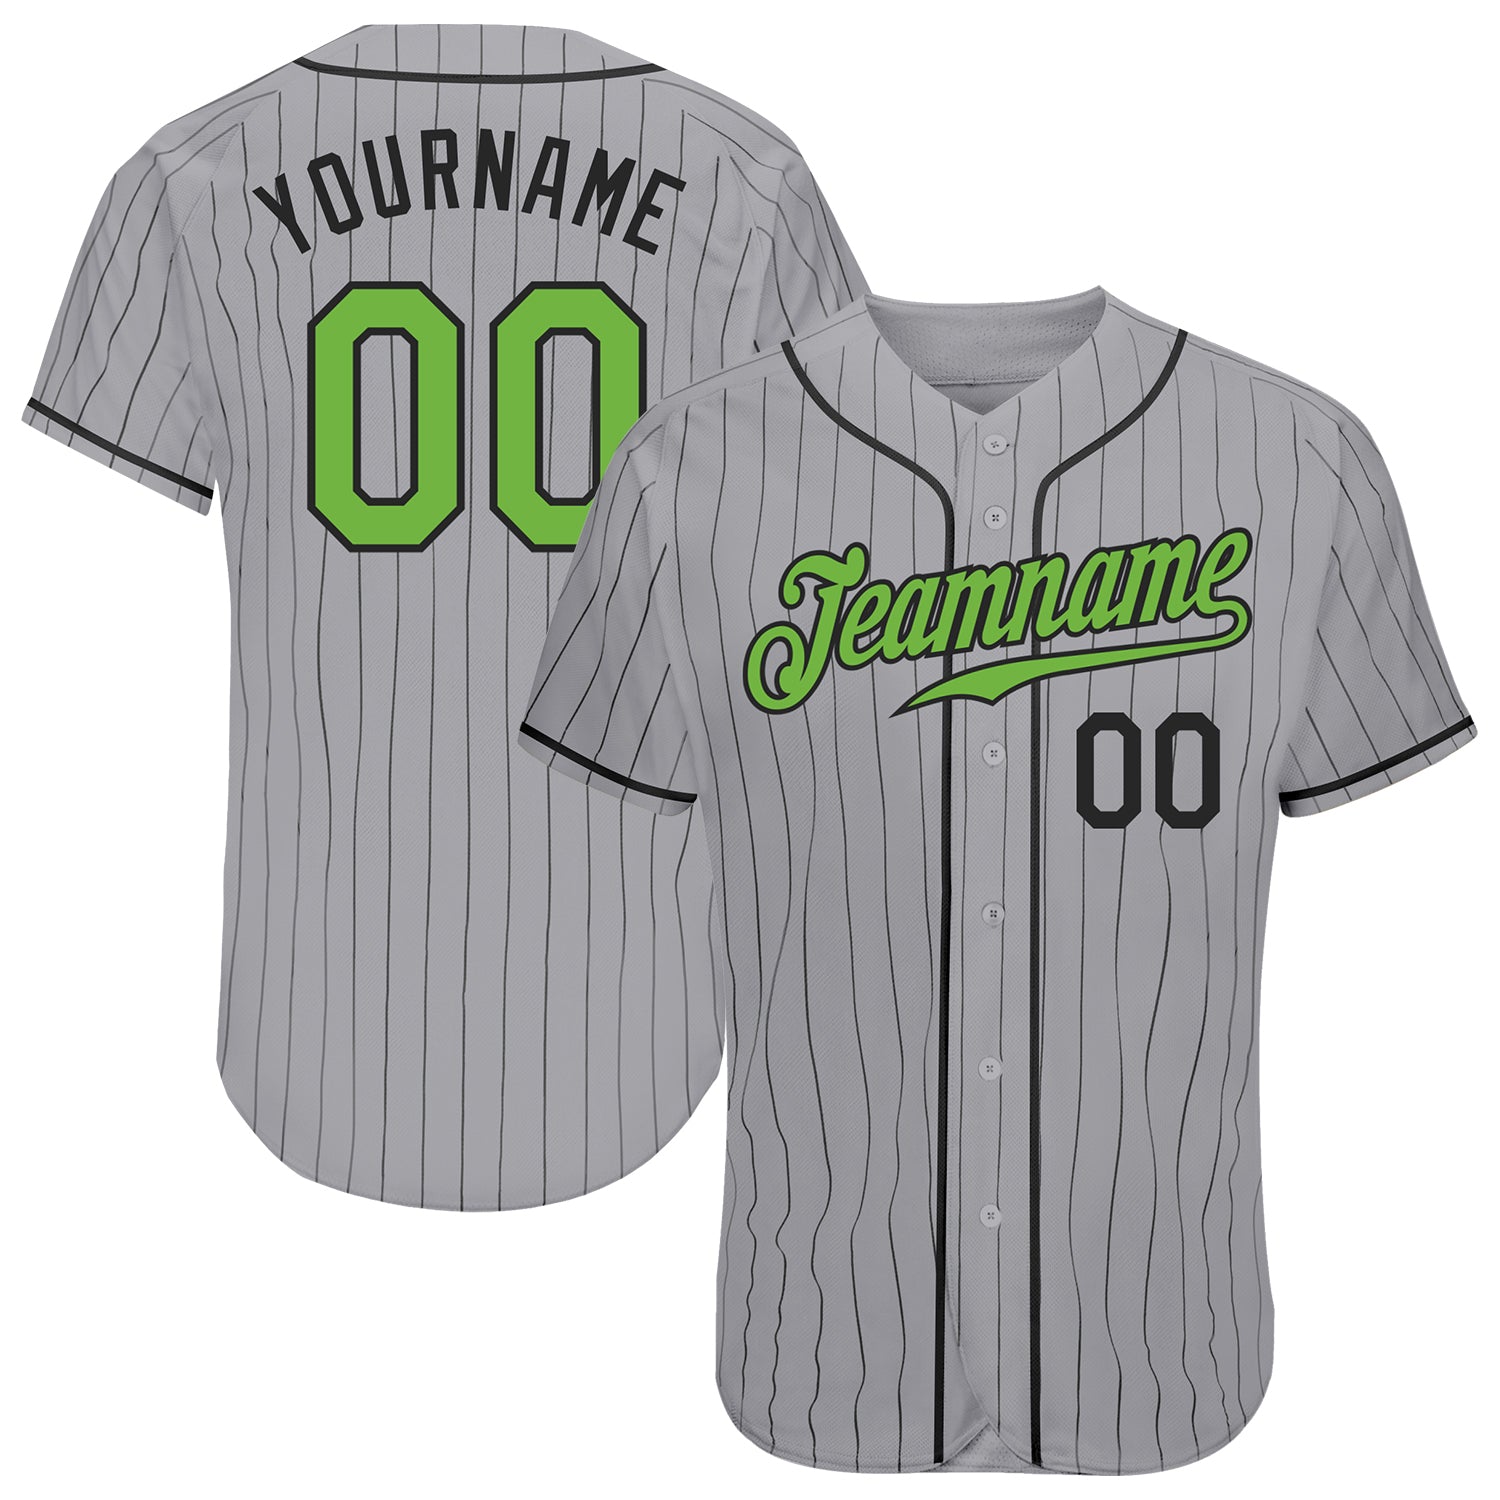 Customized Pinstriped Baseball Jersey| Full Button Down, Grey with Black Pinstripes Personalized Jersey with Your Team, Player, Numbers